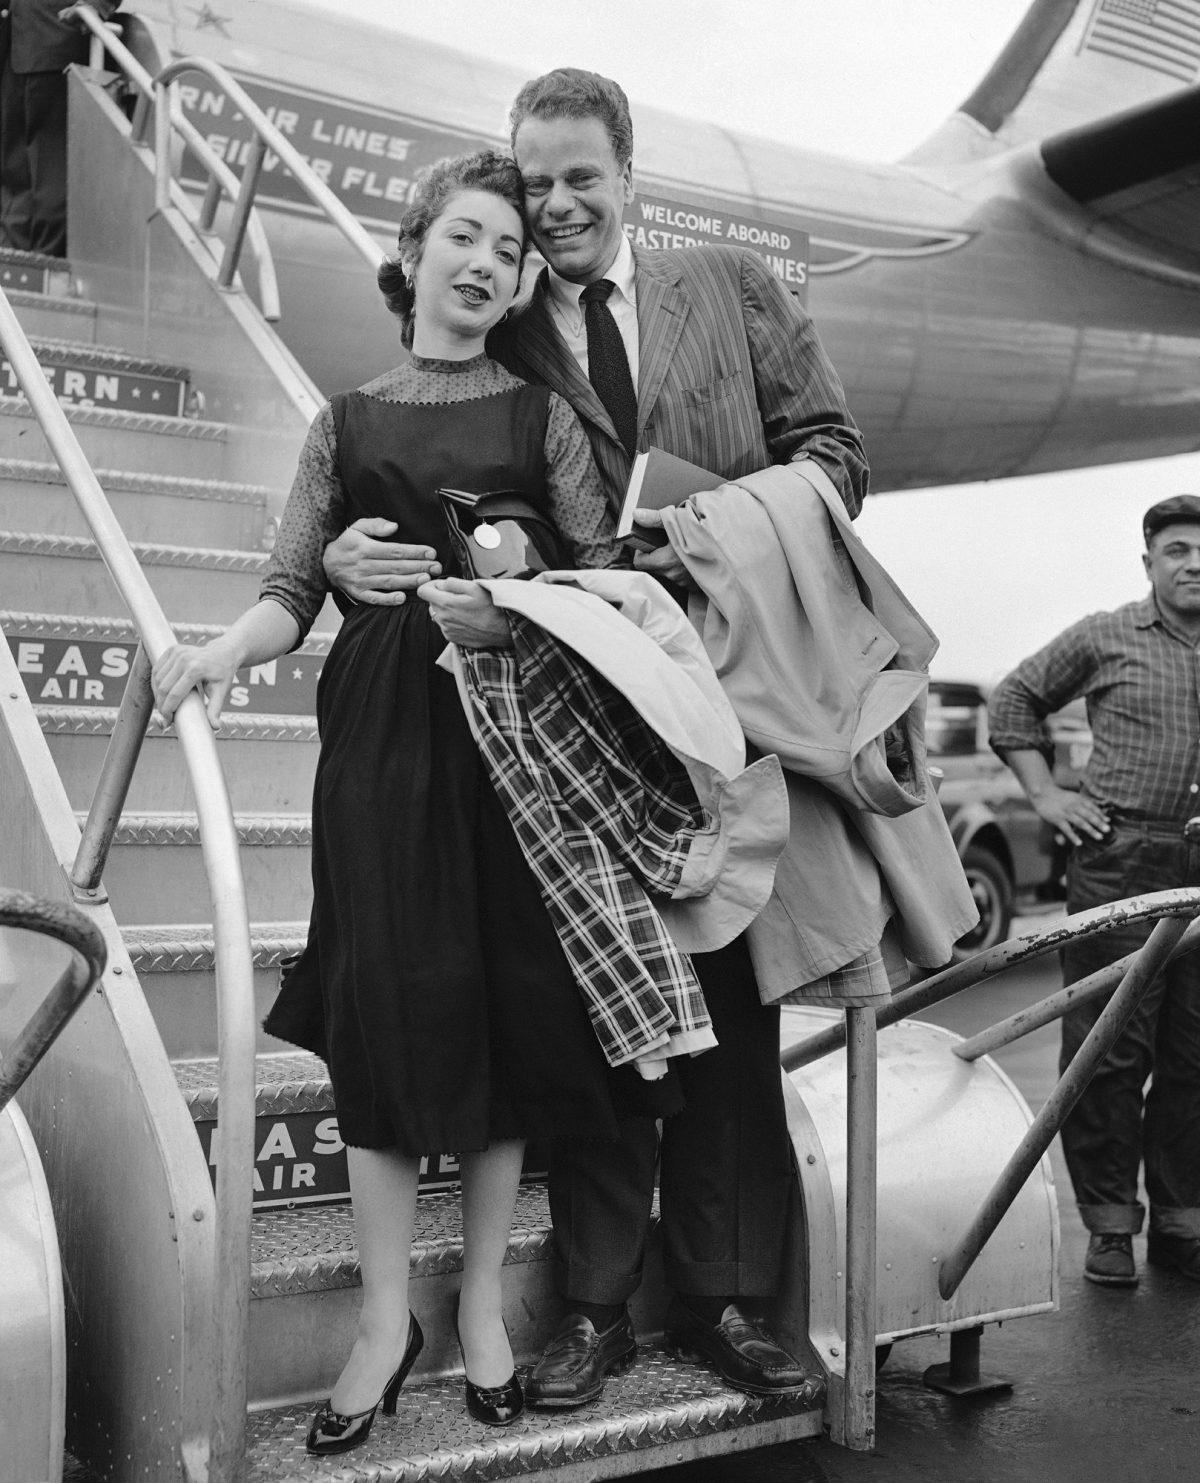 Charles Van Doren and his bride, the former Geraldine Ann Bernstein, arrive from their Puerto Rican honeymoon at the former Idlewild Airport in New York on April 2, 1957. (AP Photo, File)